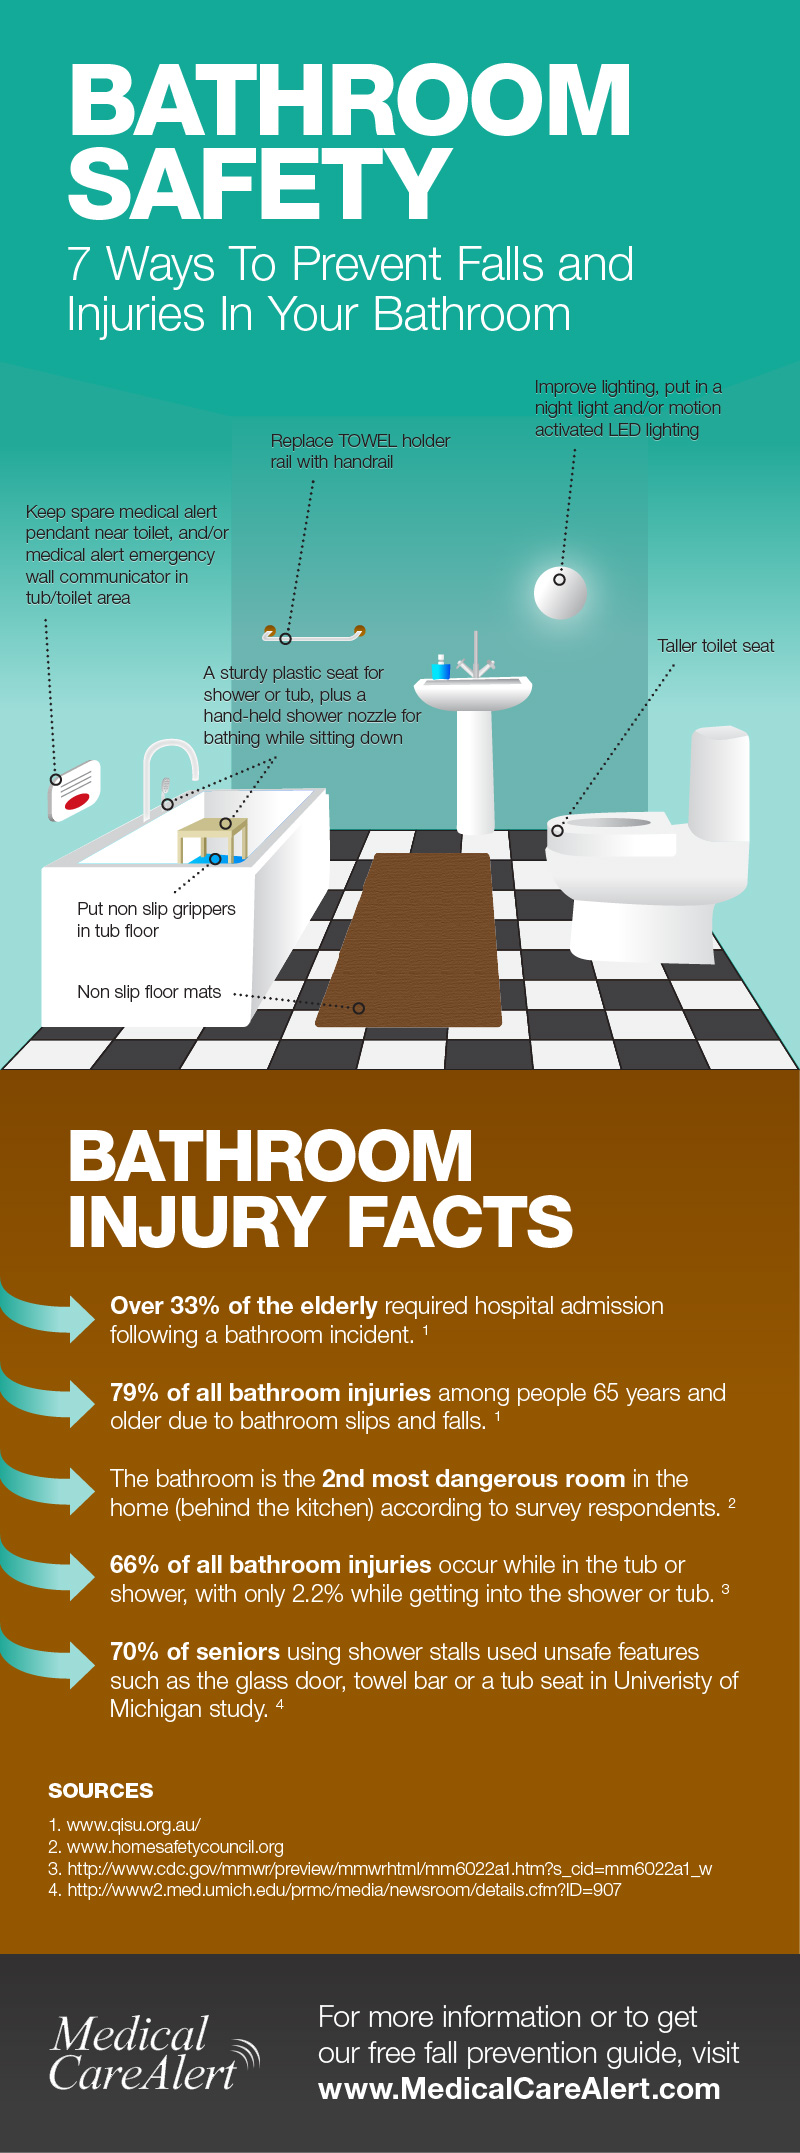 Bathroom Safety Infographic